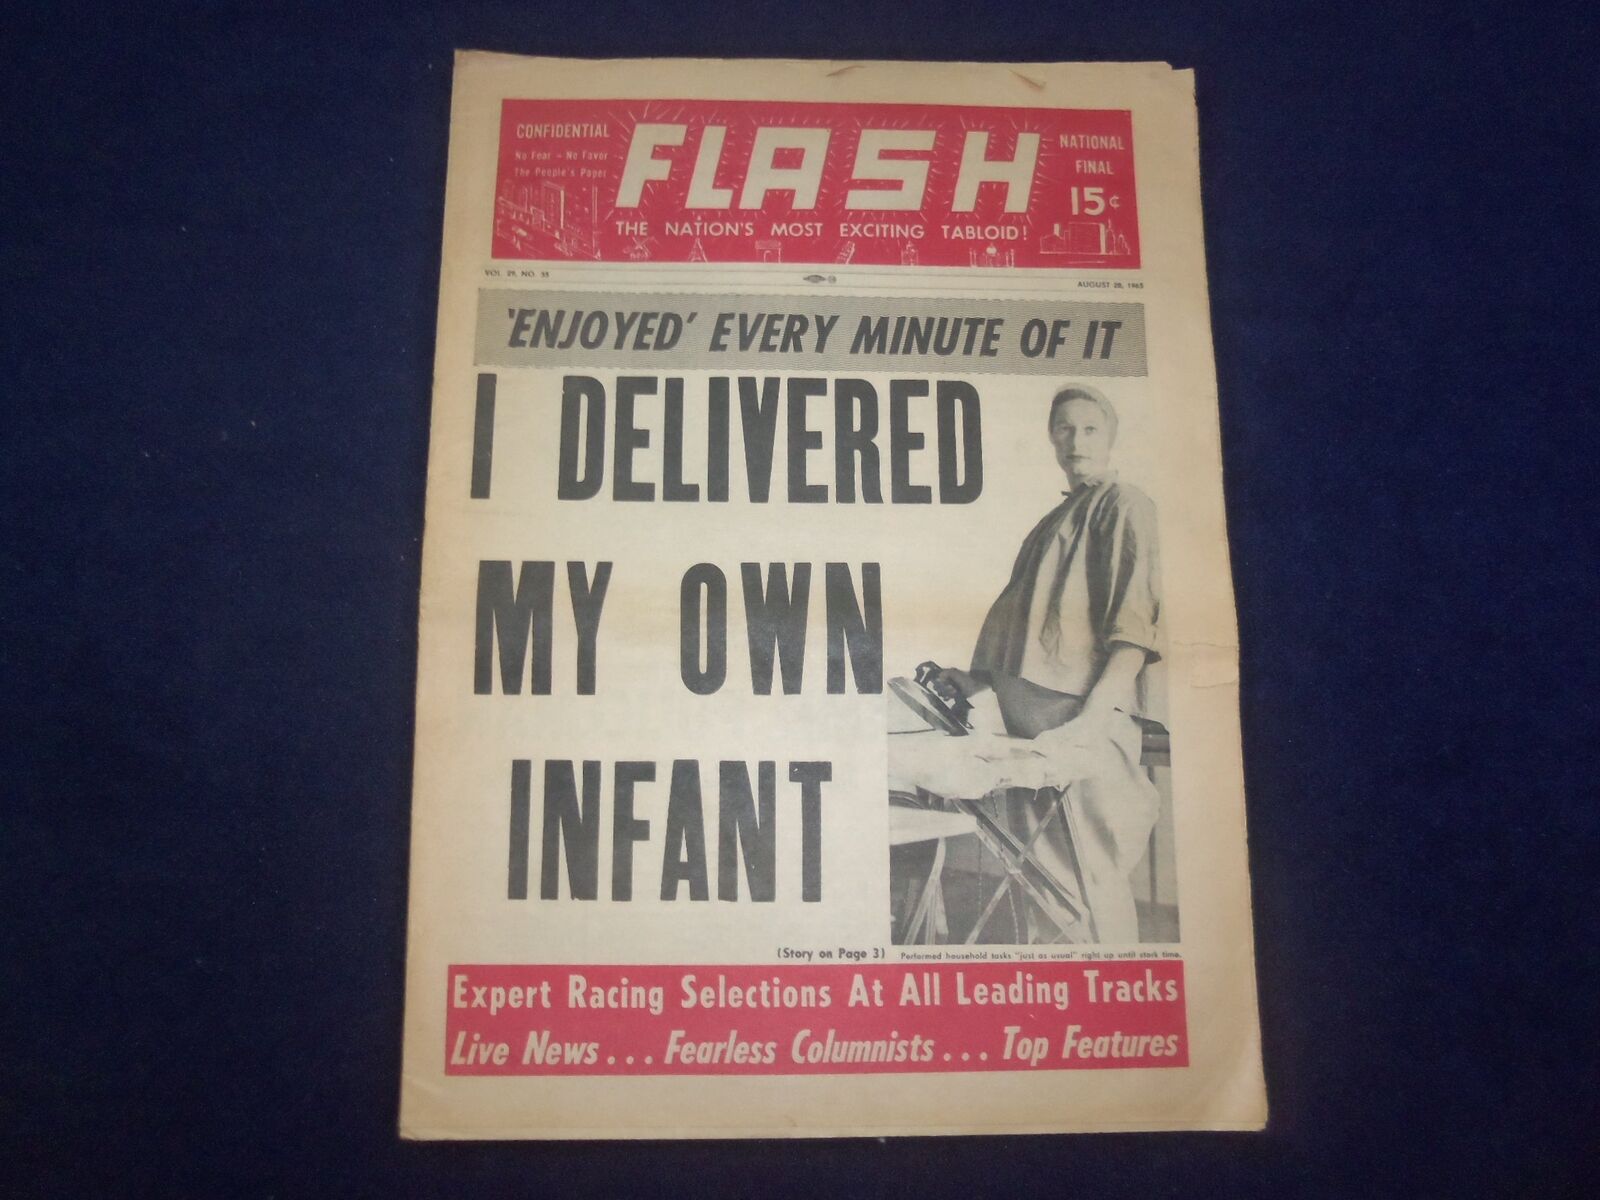 1965 AUGUST 28 FLASH NEWSPAPER - I DELIVERED MY OWN INFANT - NP 6947